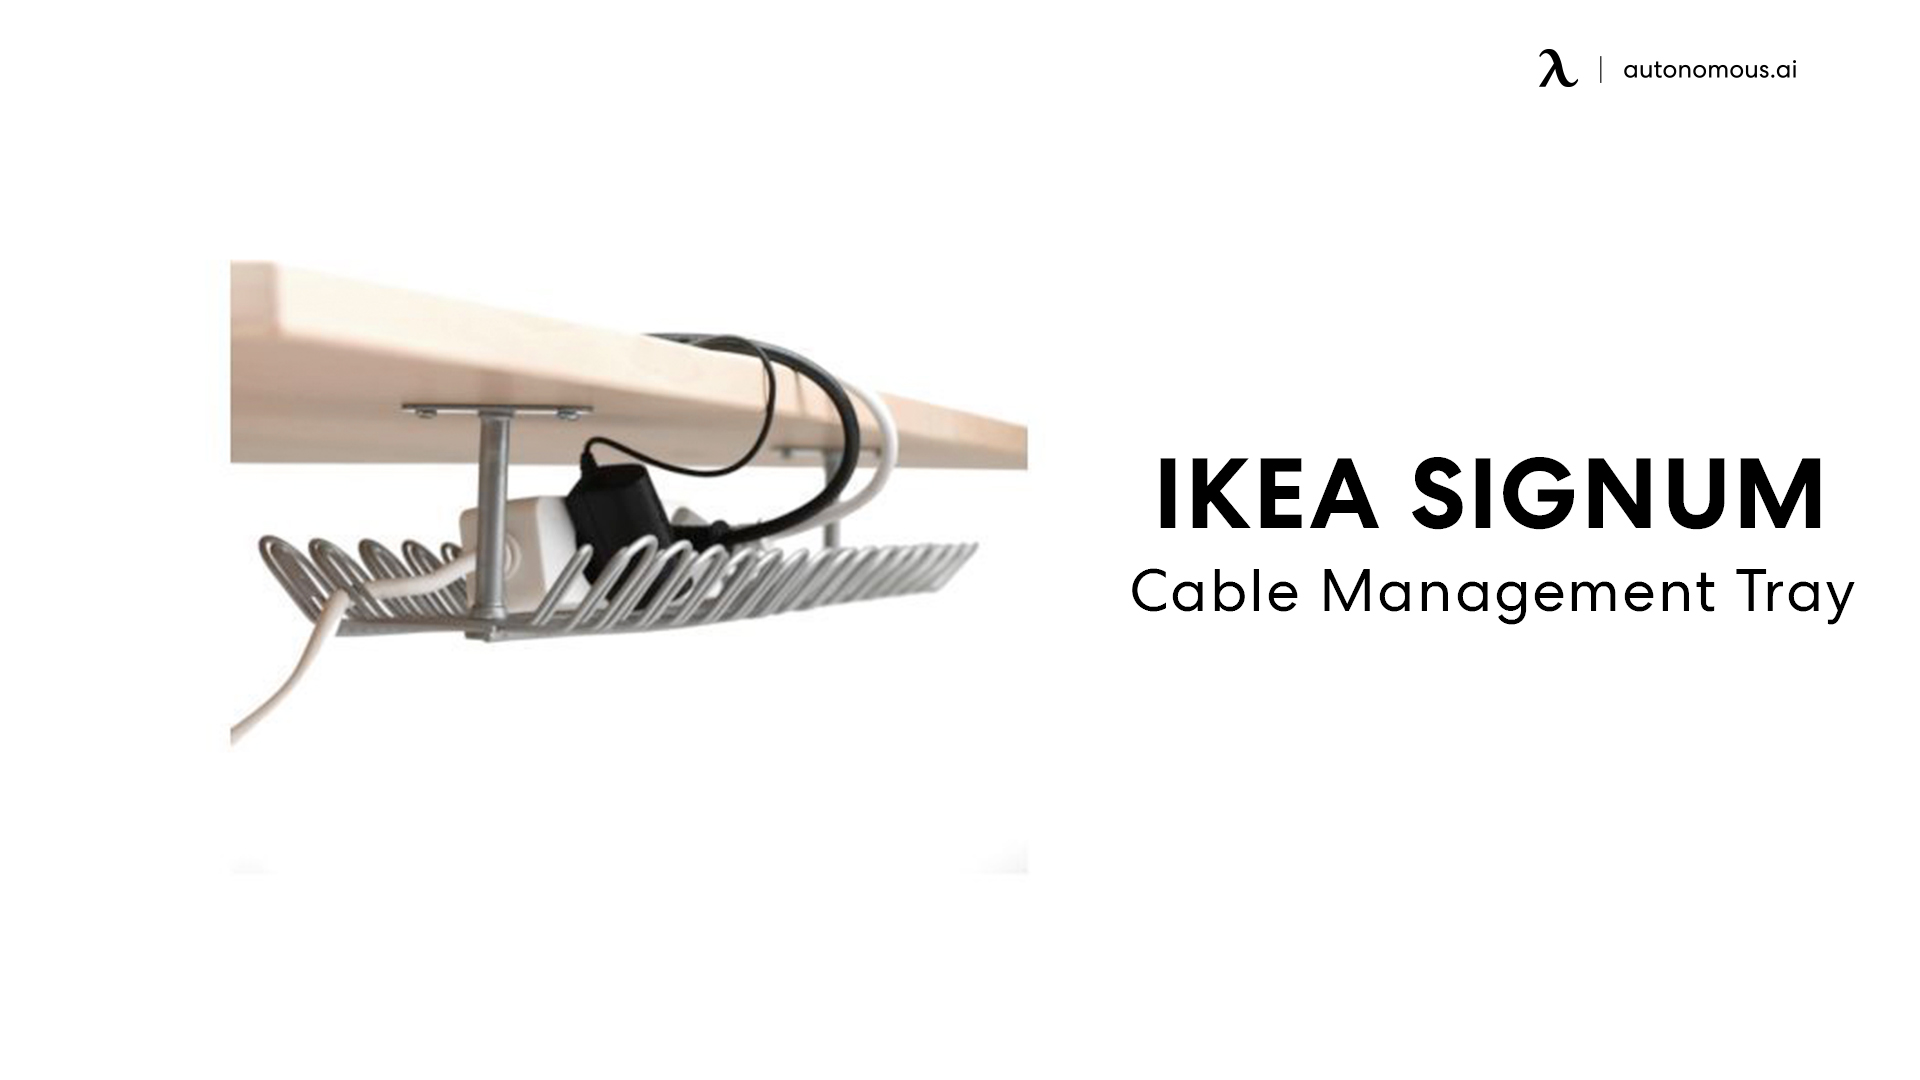 Cable Management Tray by IKEA Signum